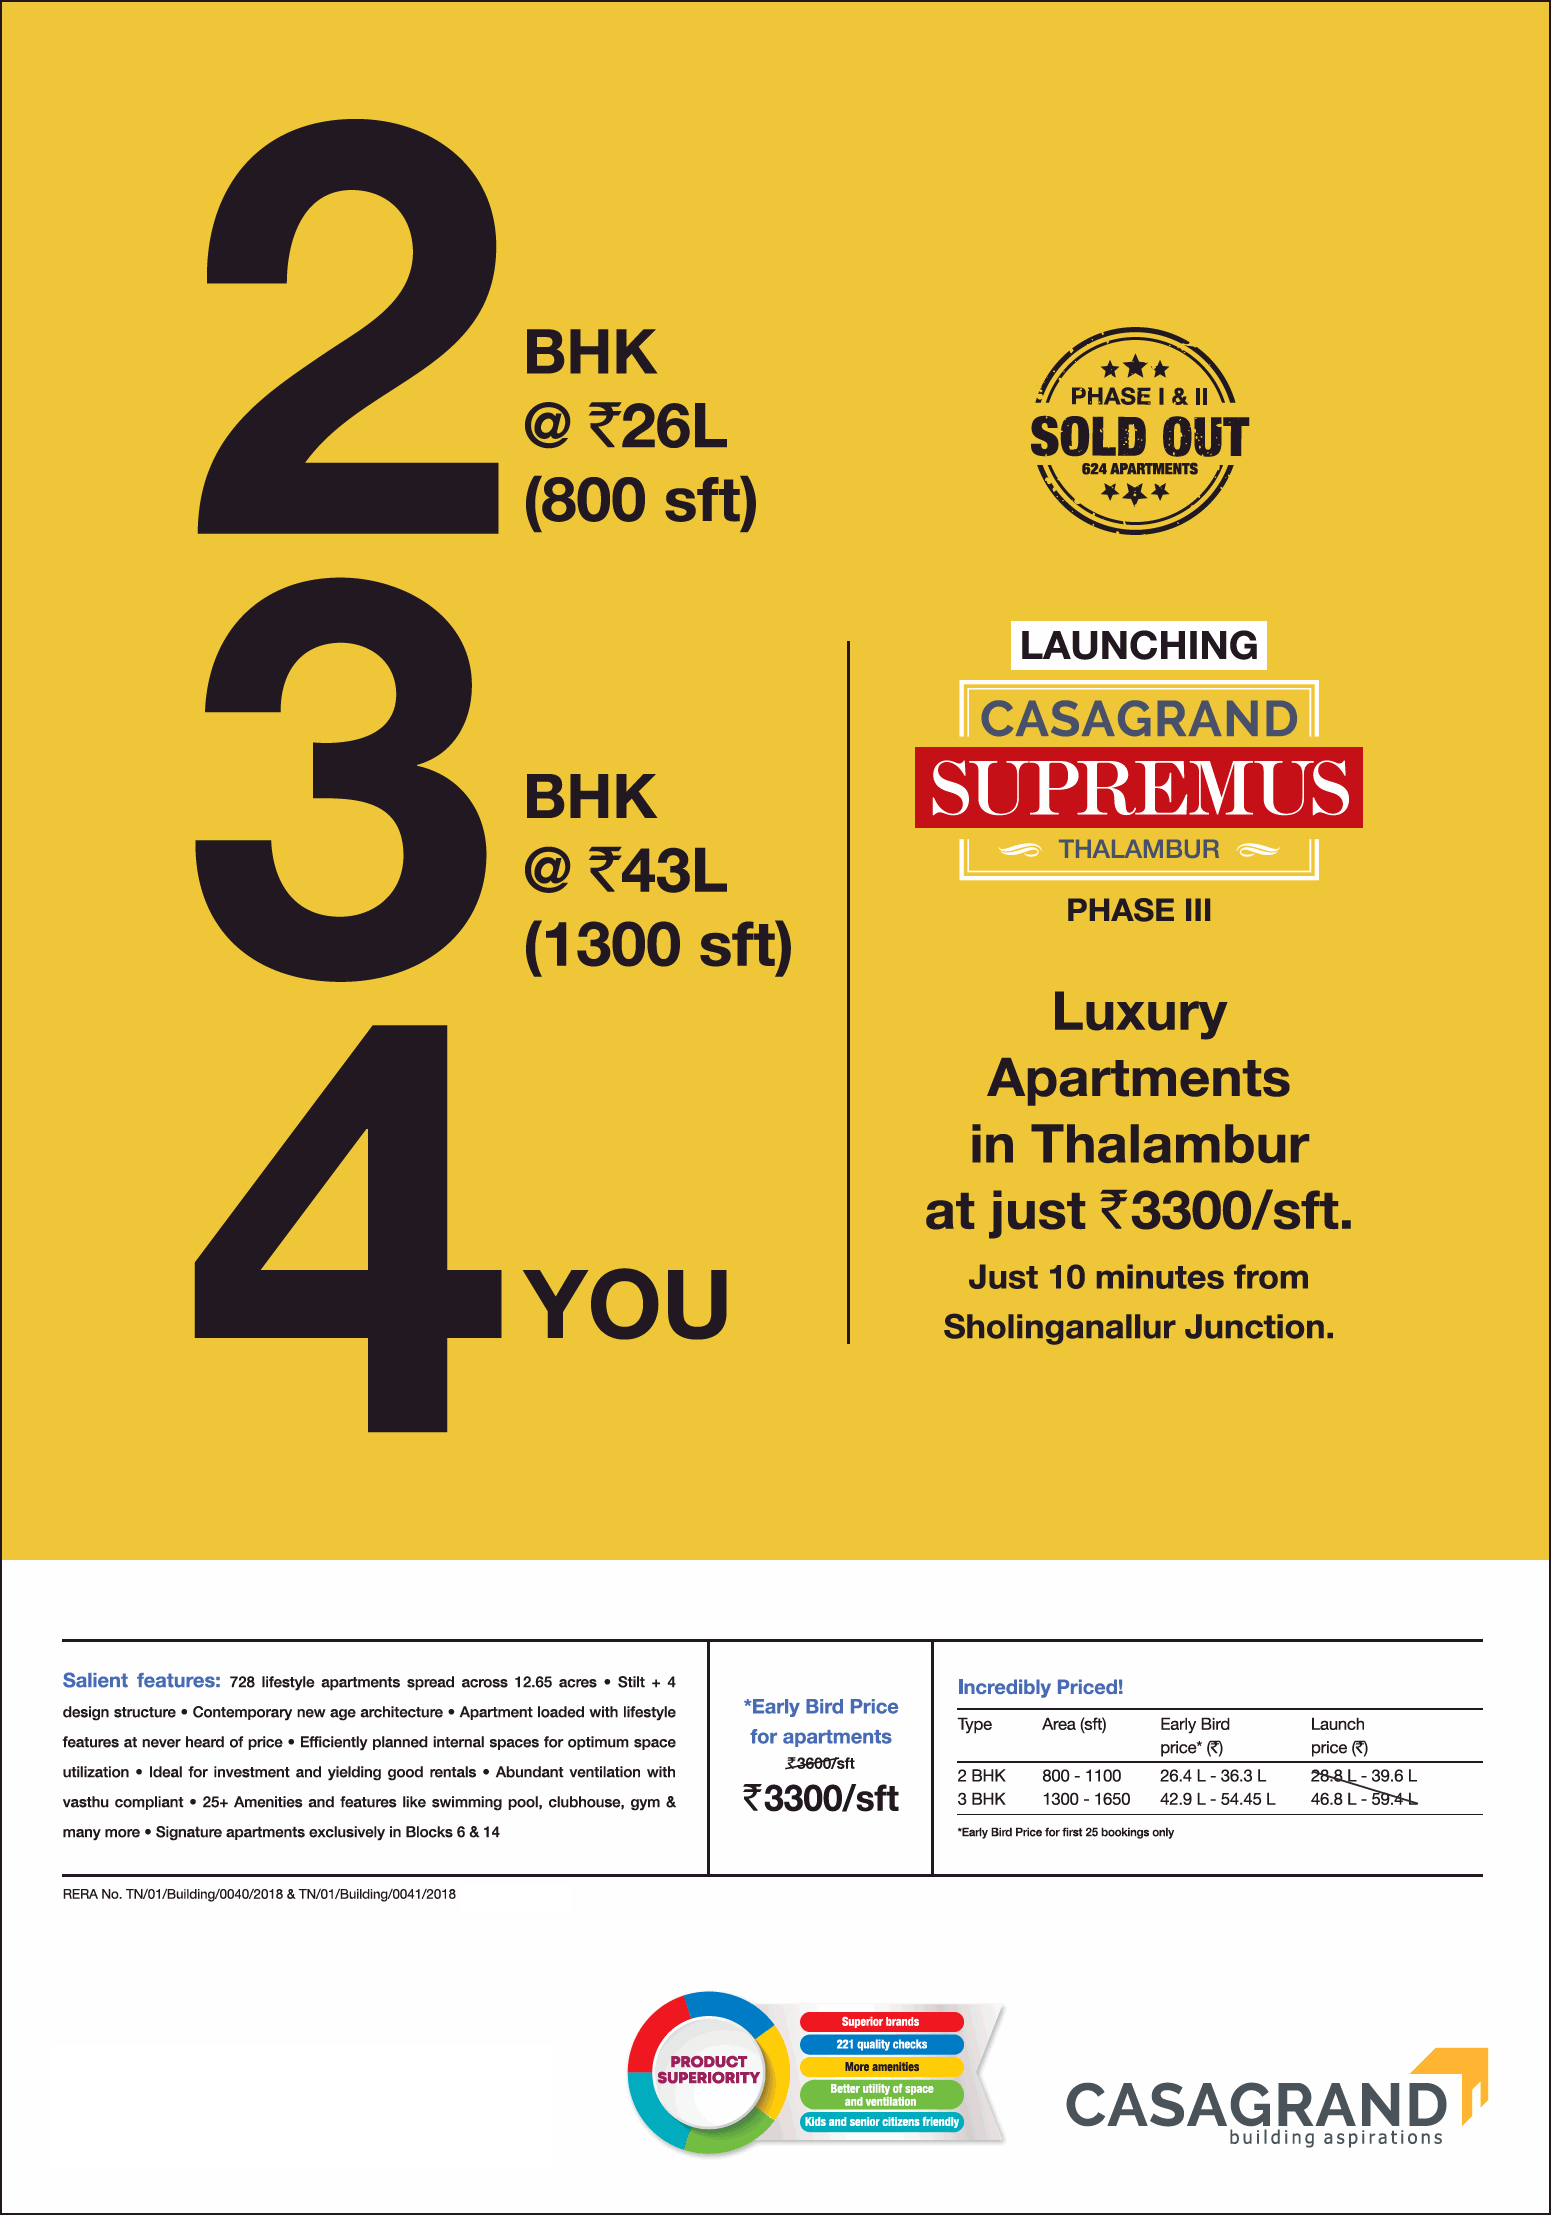 Launching phase 3 with luxury apartments at Casagrand Supremus in Chennai